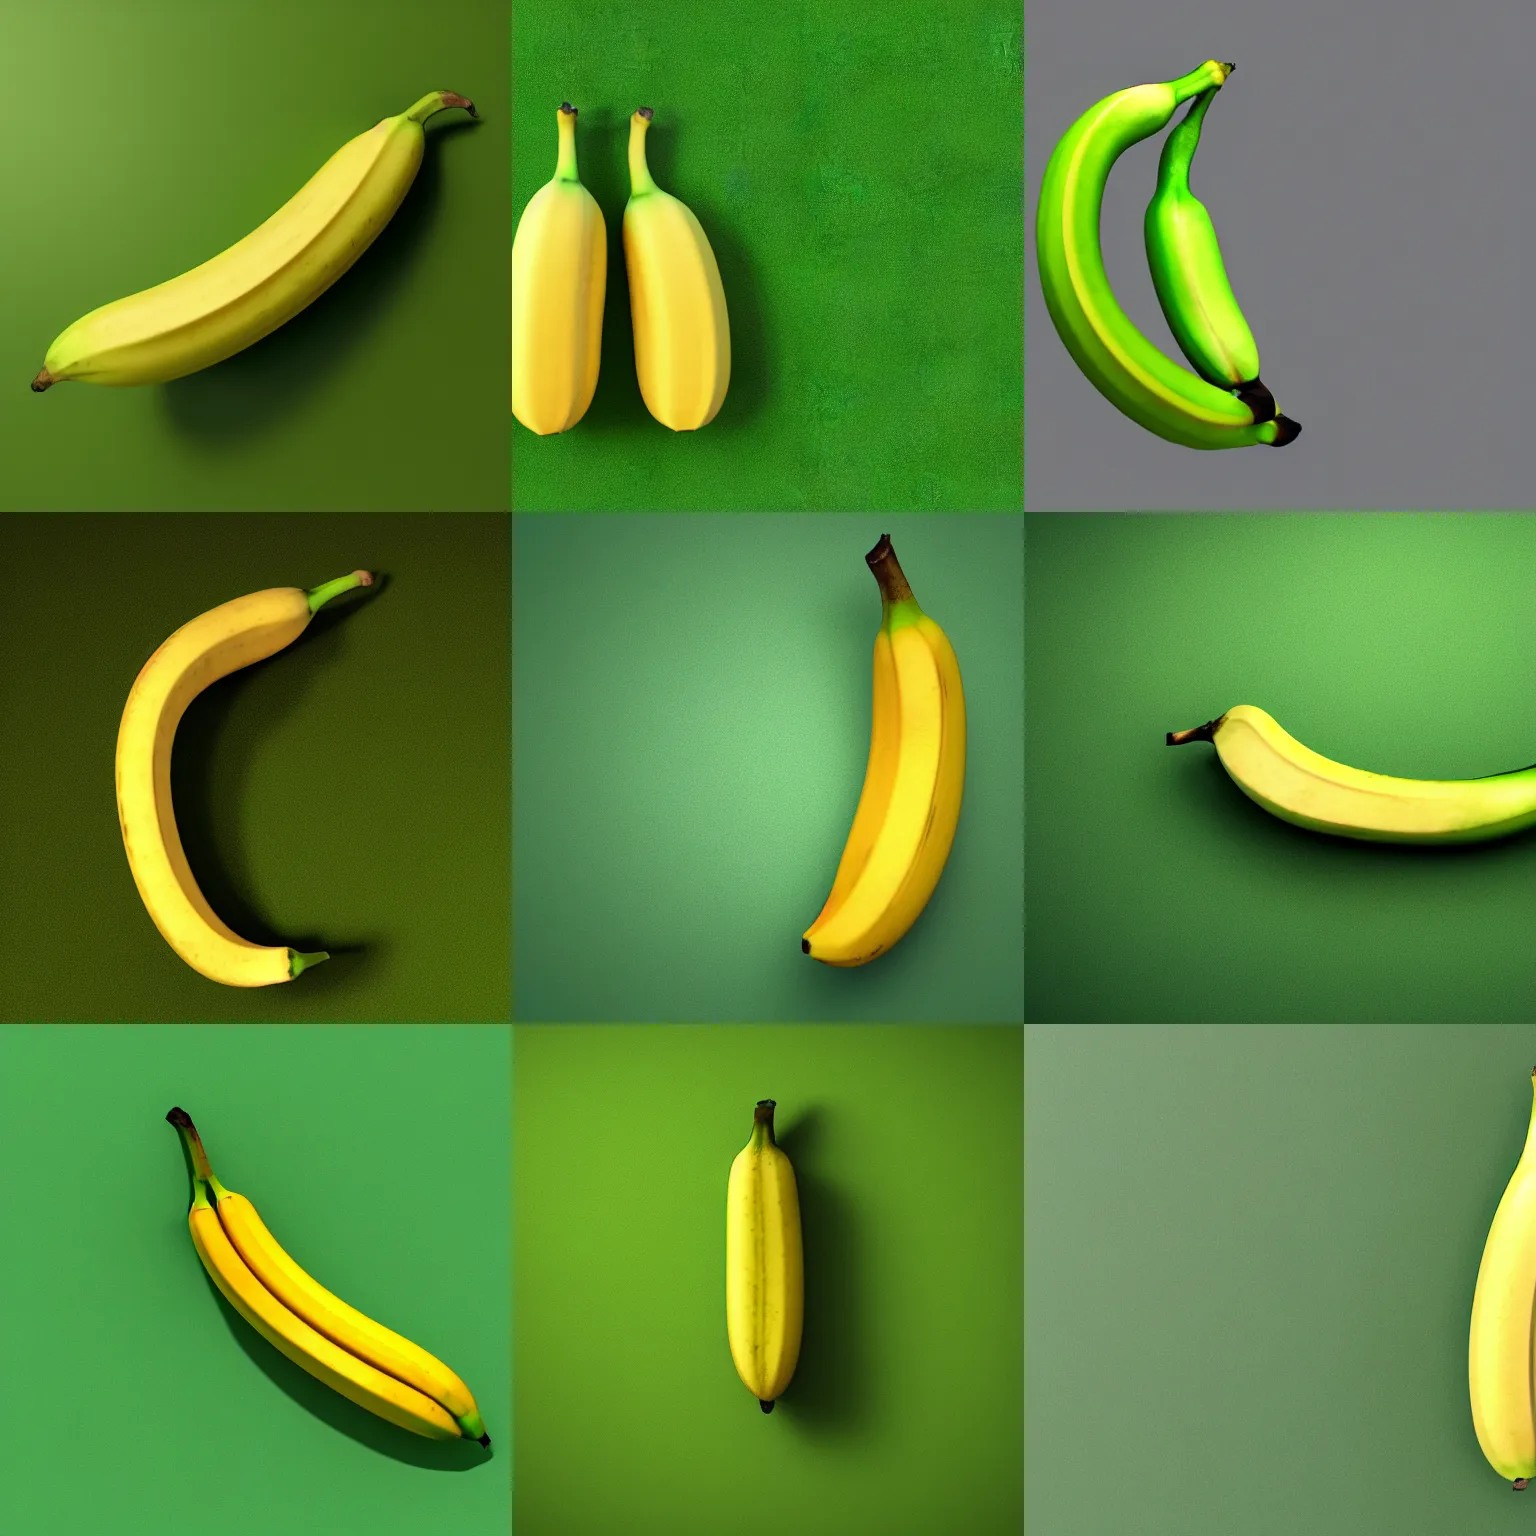 Prompt: 3D render of a banana on a green background